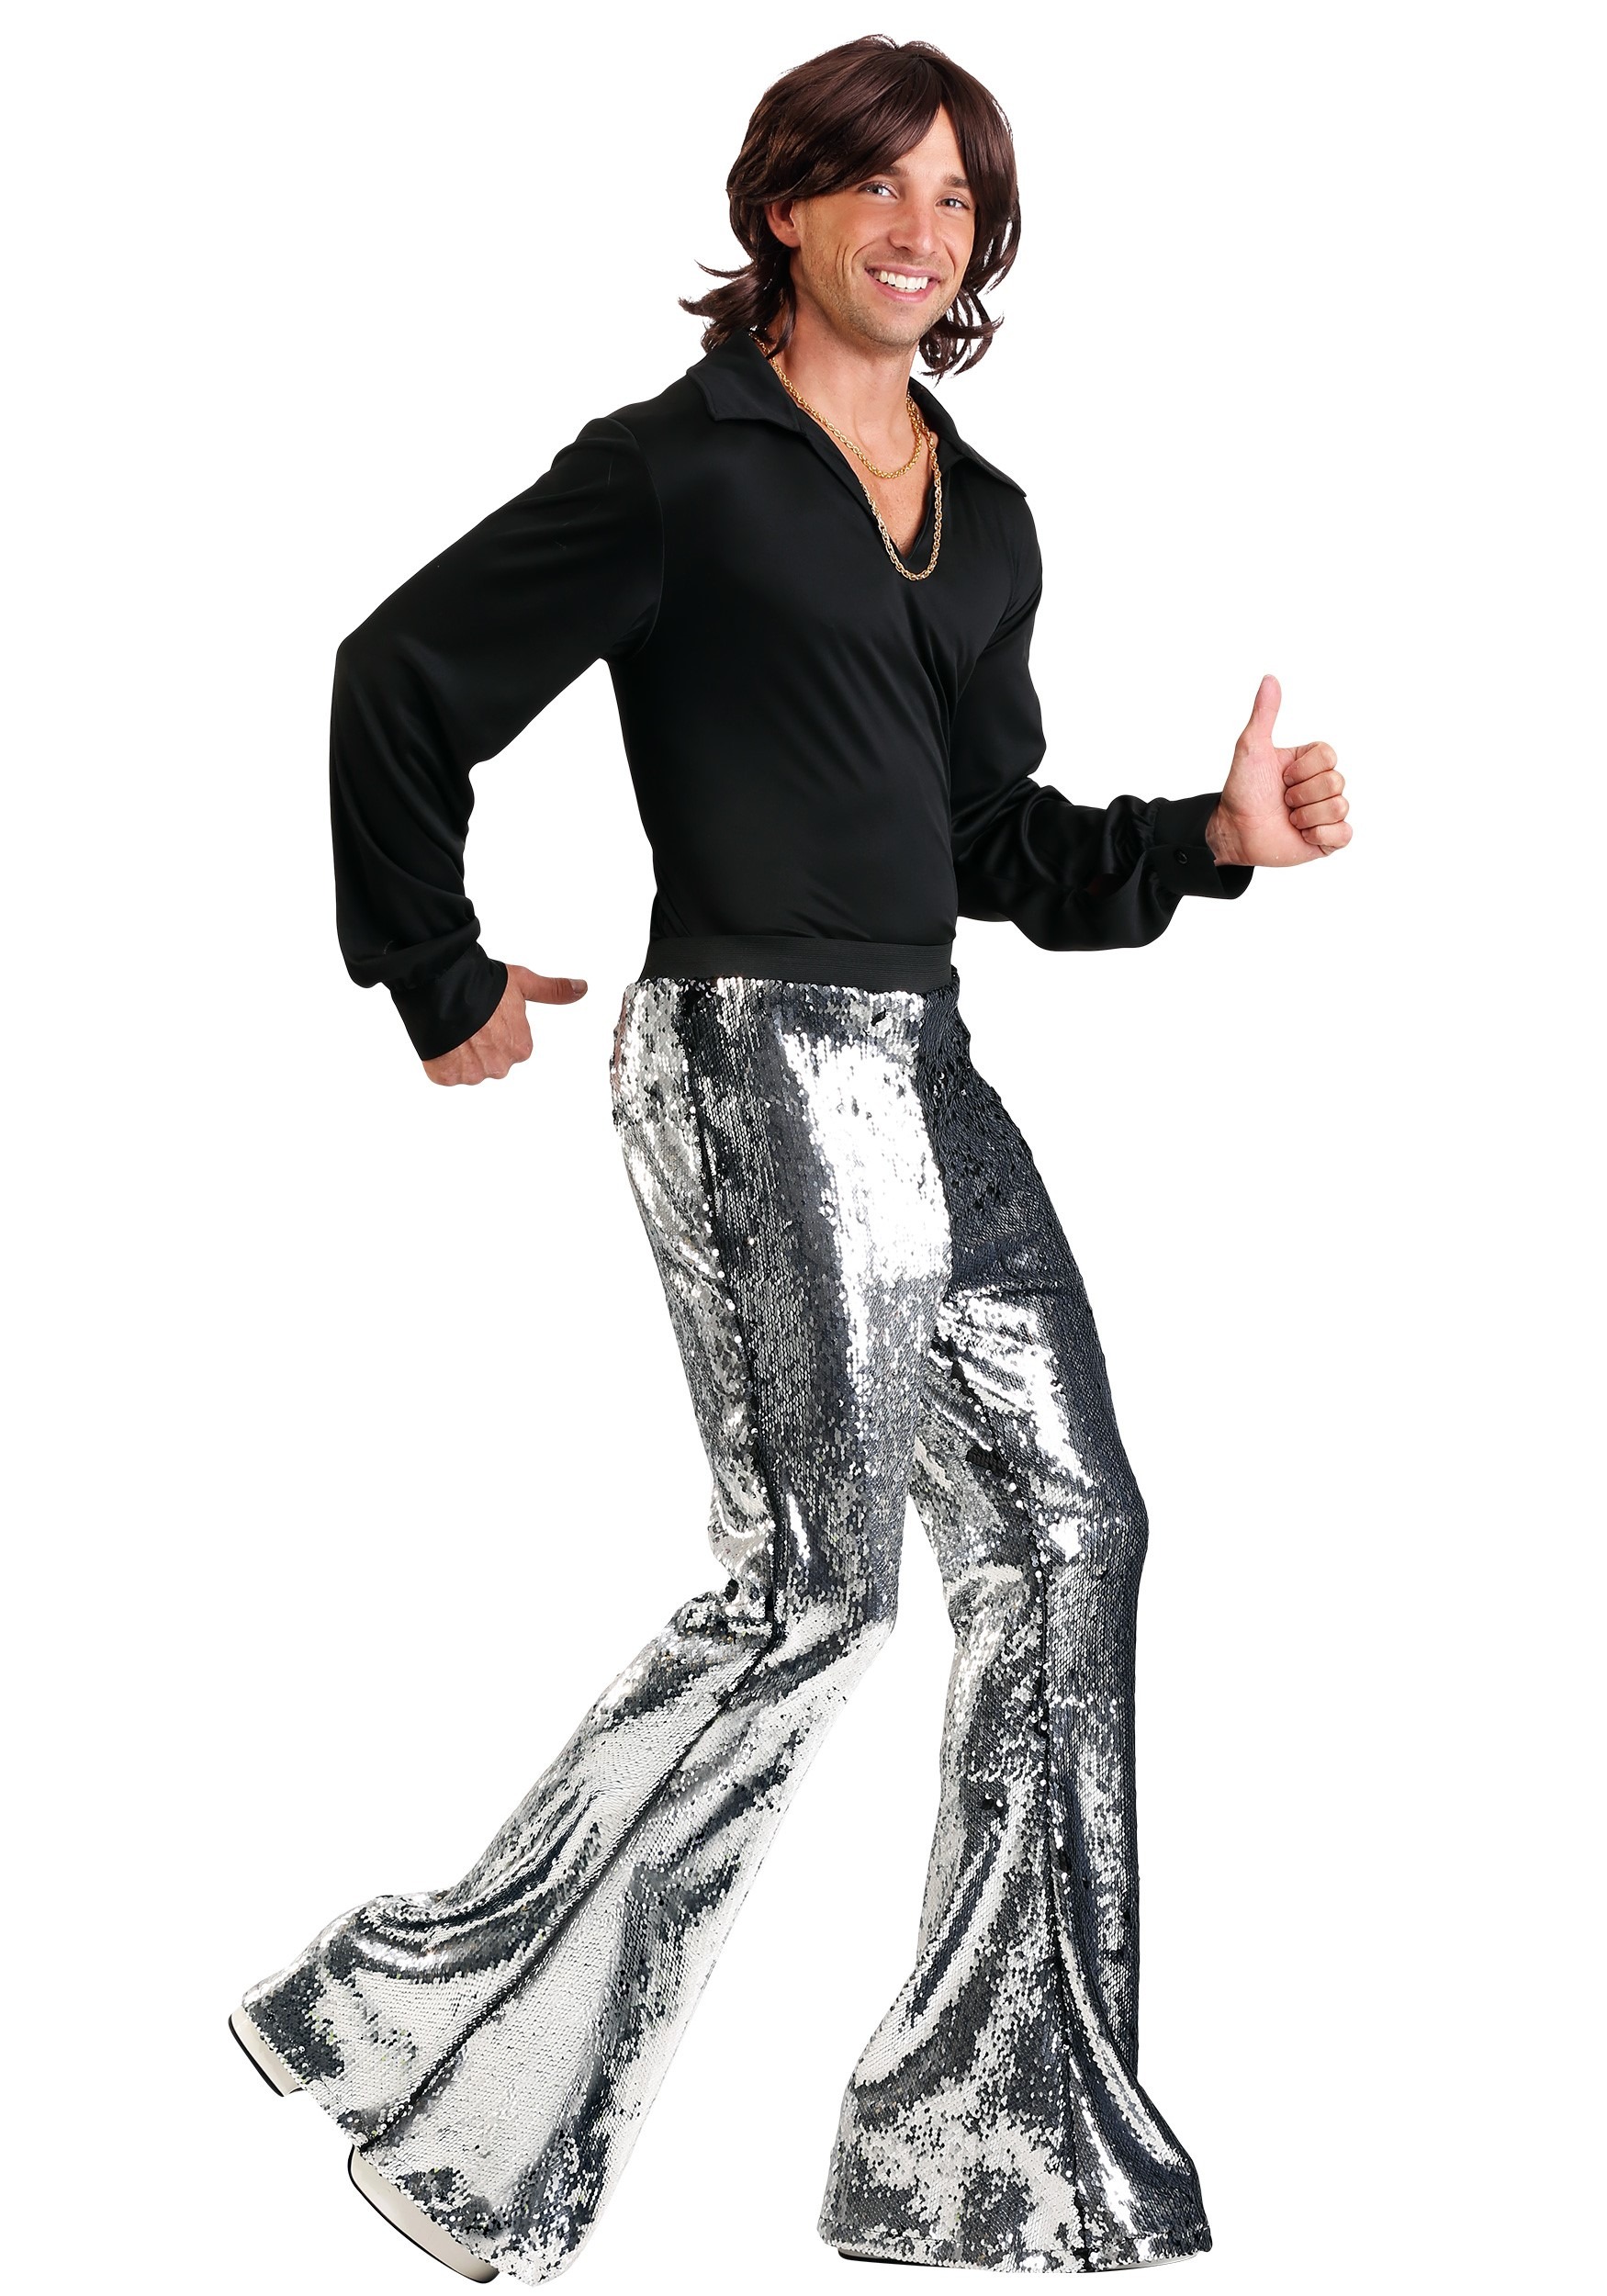 Men's Fashion Youth Glitter Sequins Party Pants Casual Stretchy